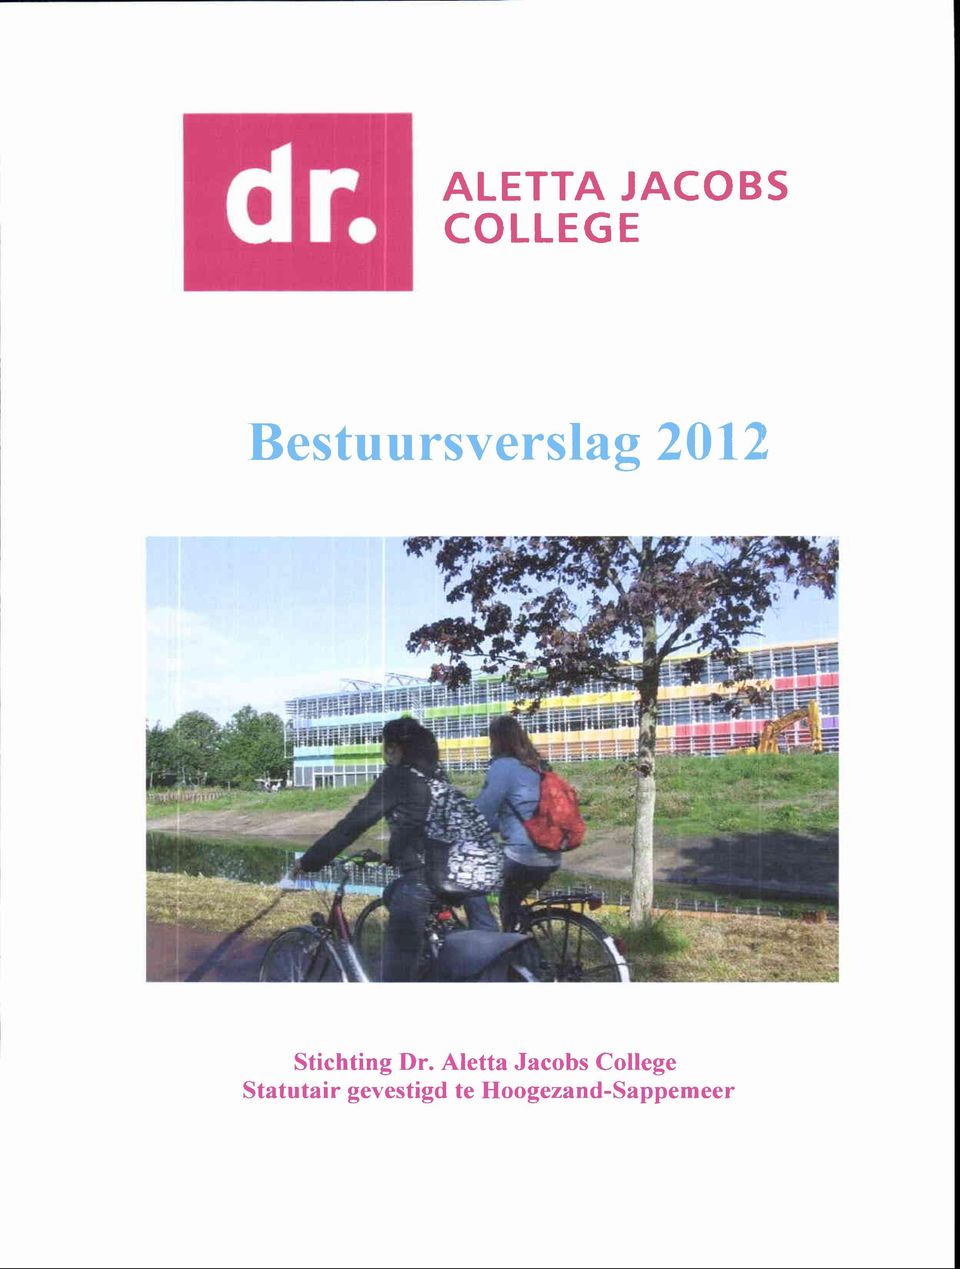 Dr. Aletta Jacobs College